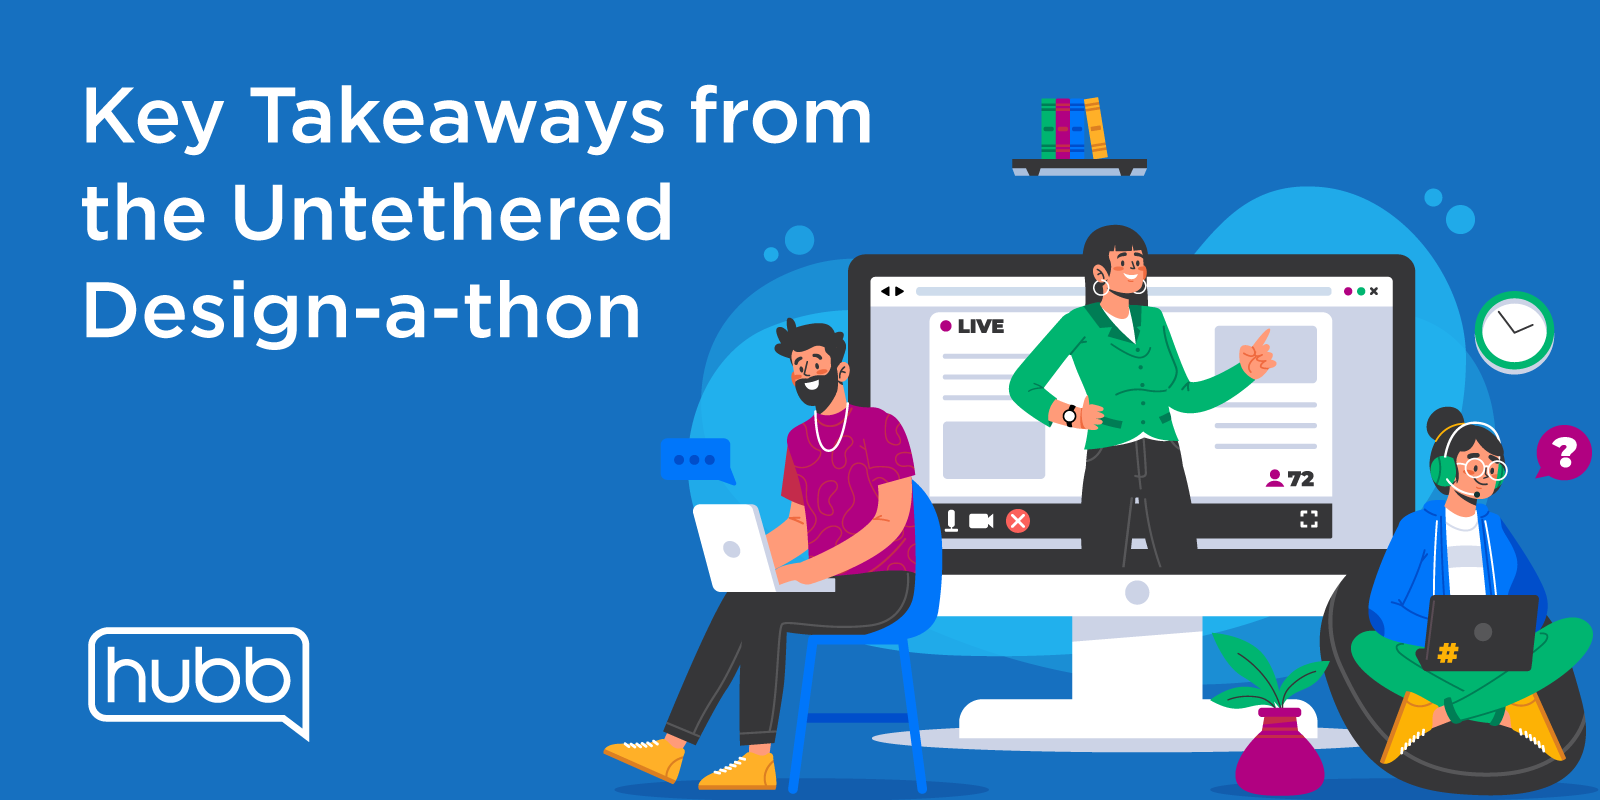 Our Key Takeaways from the Untethered Design-a-thon